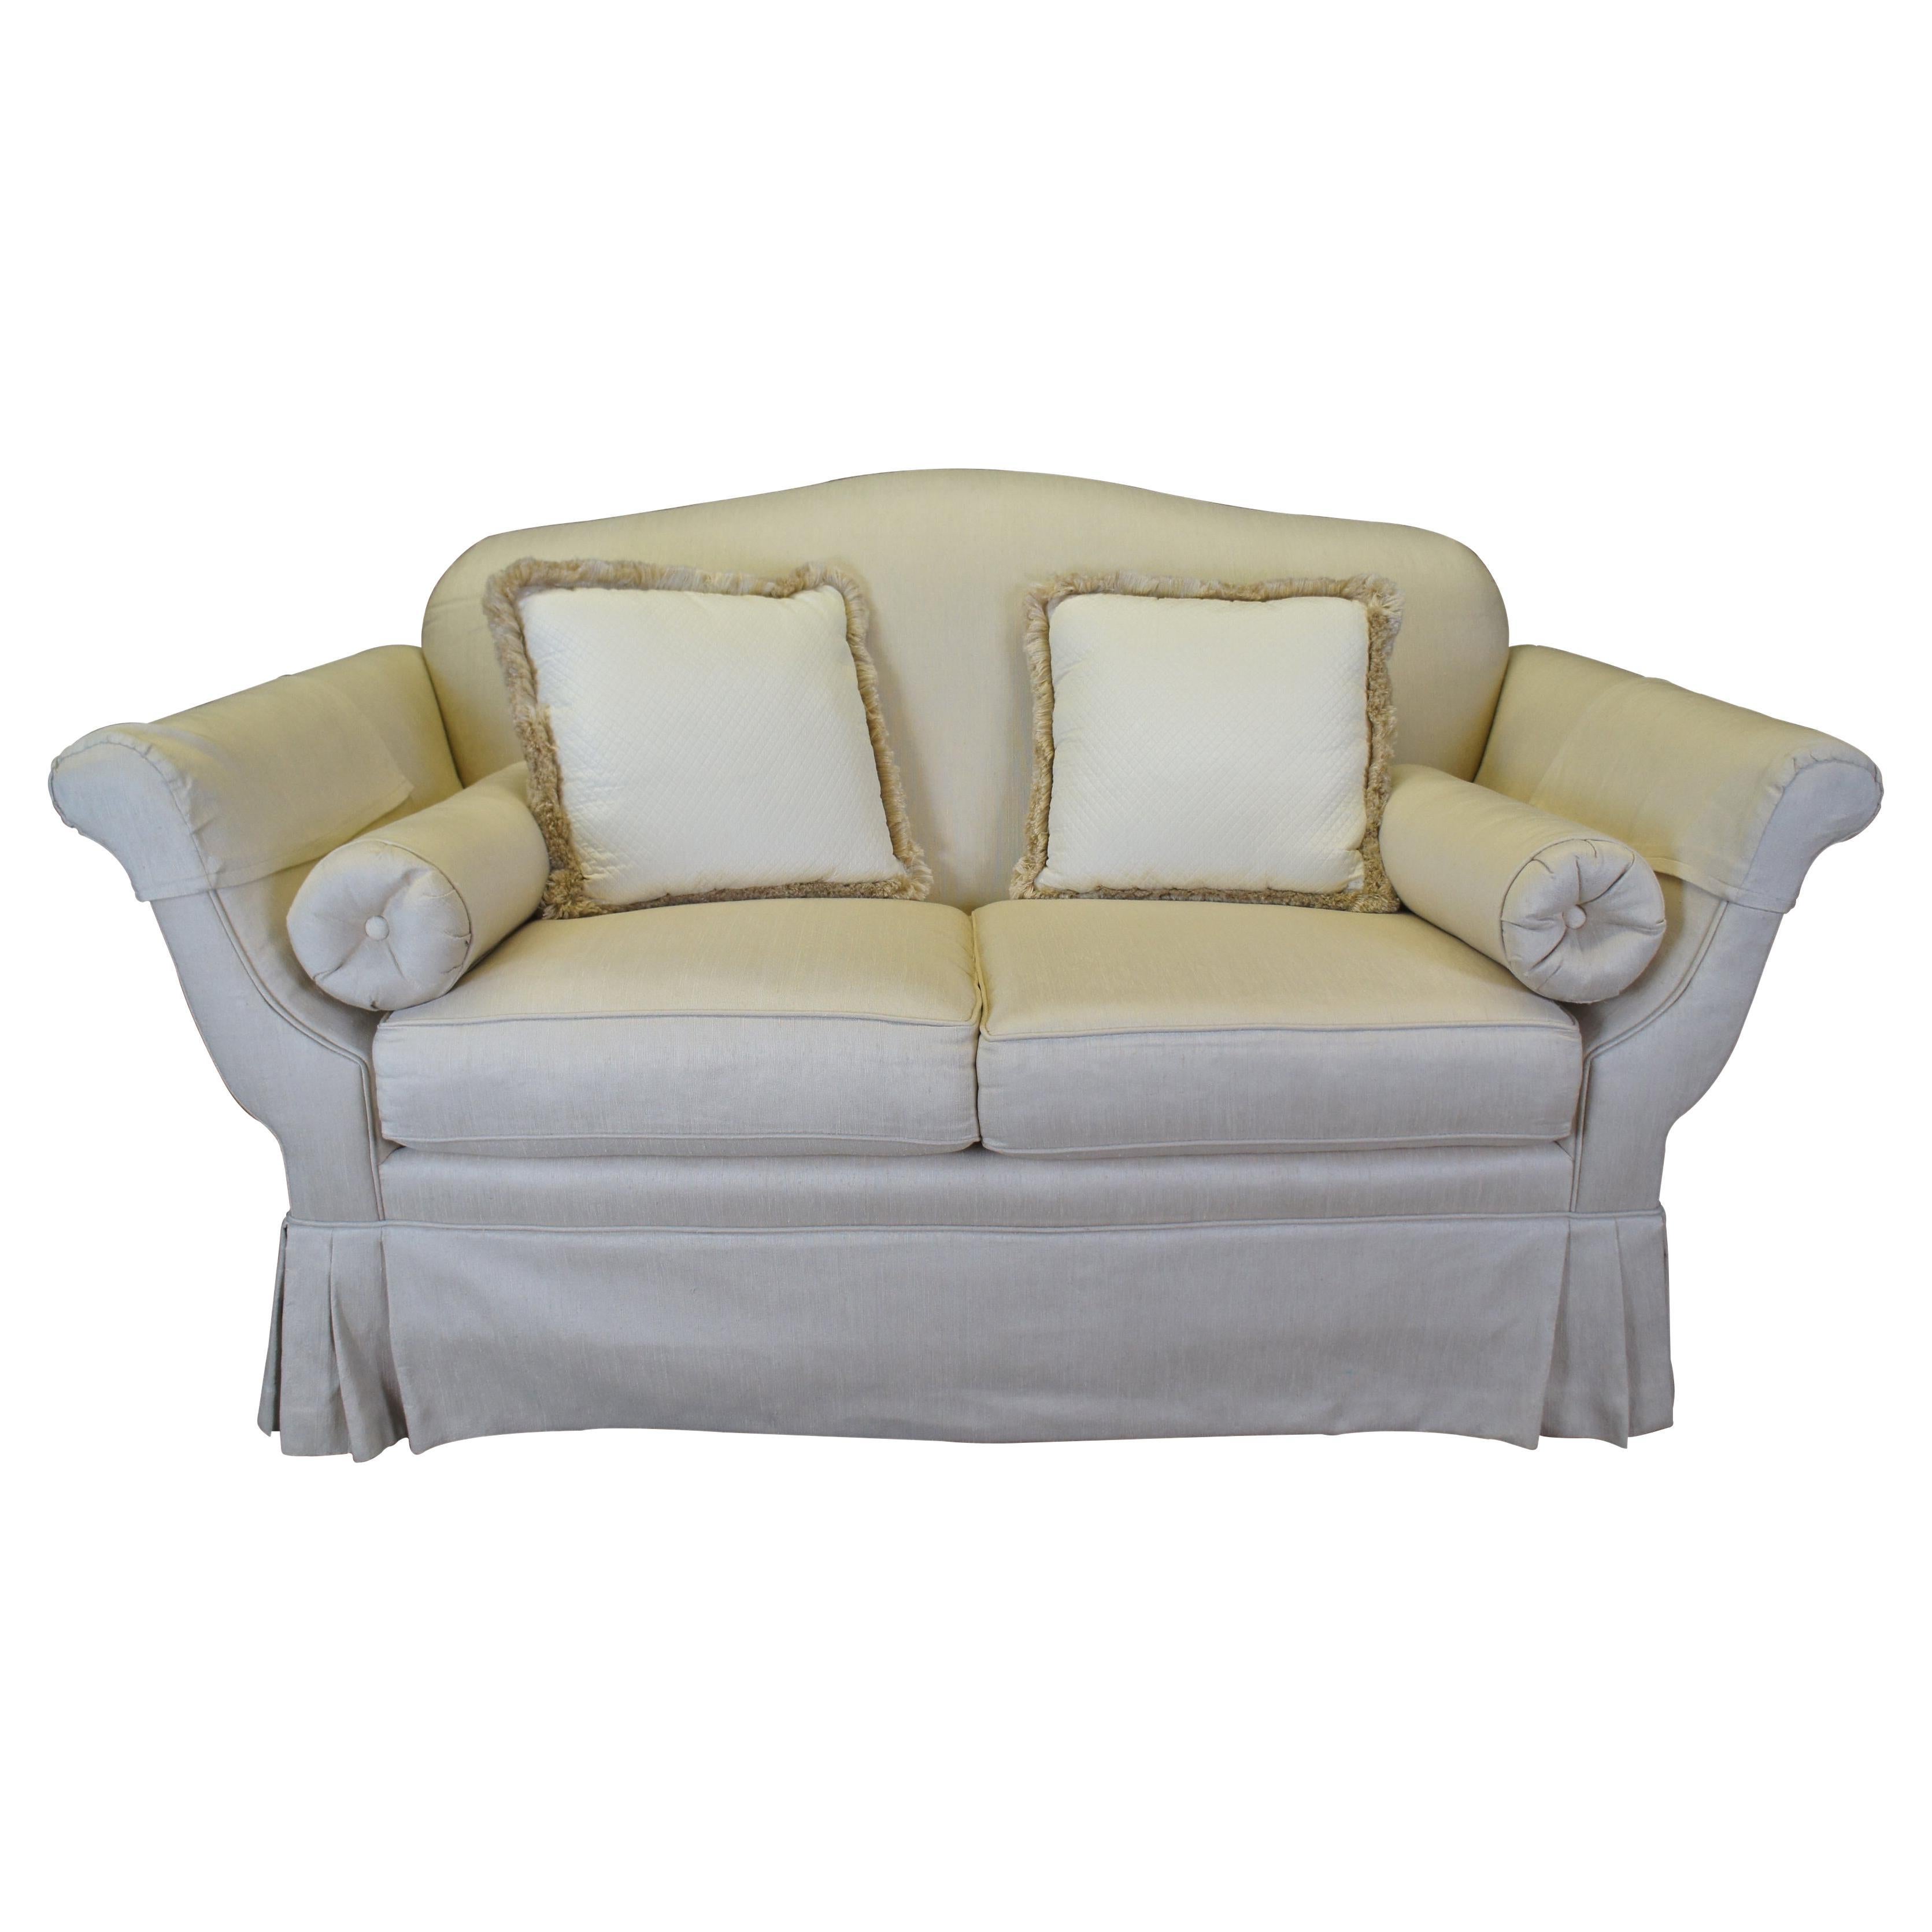 Versace Style Flaired Arm Tuxedo Knole Sofa by Stefano Giovanni